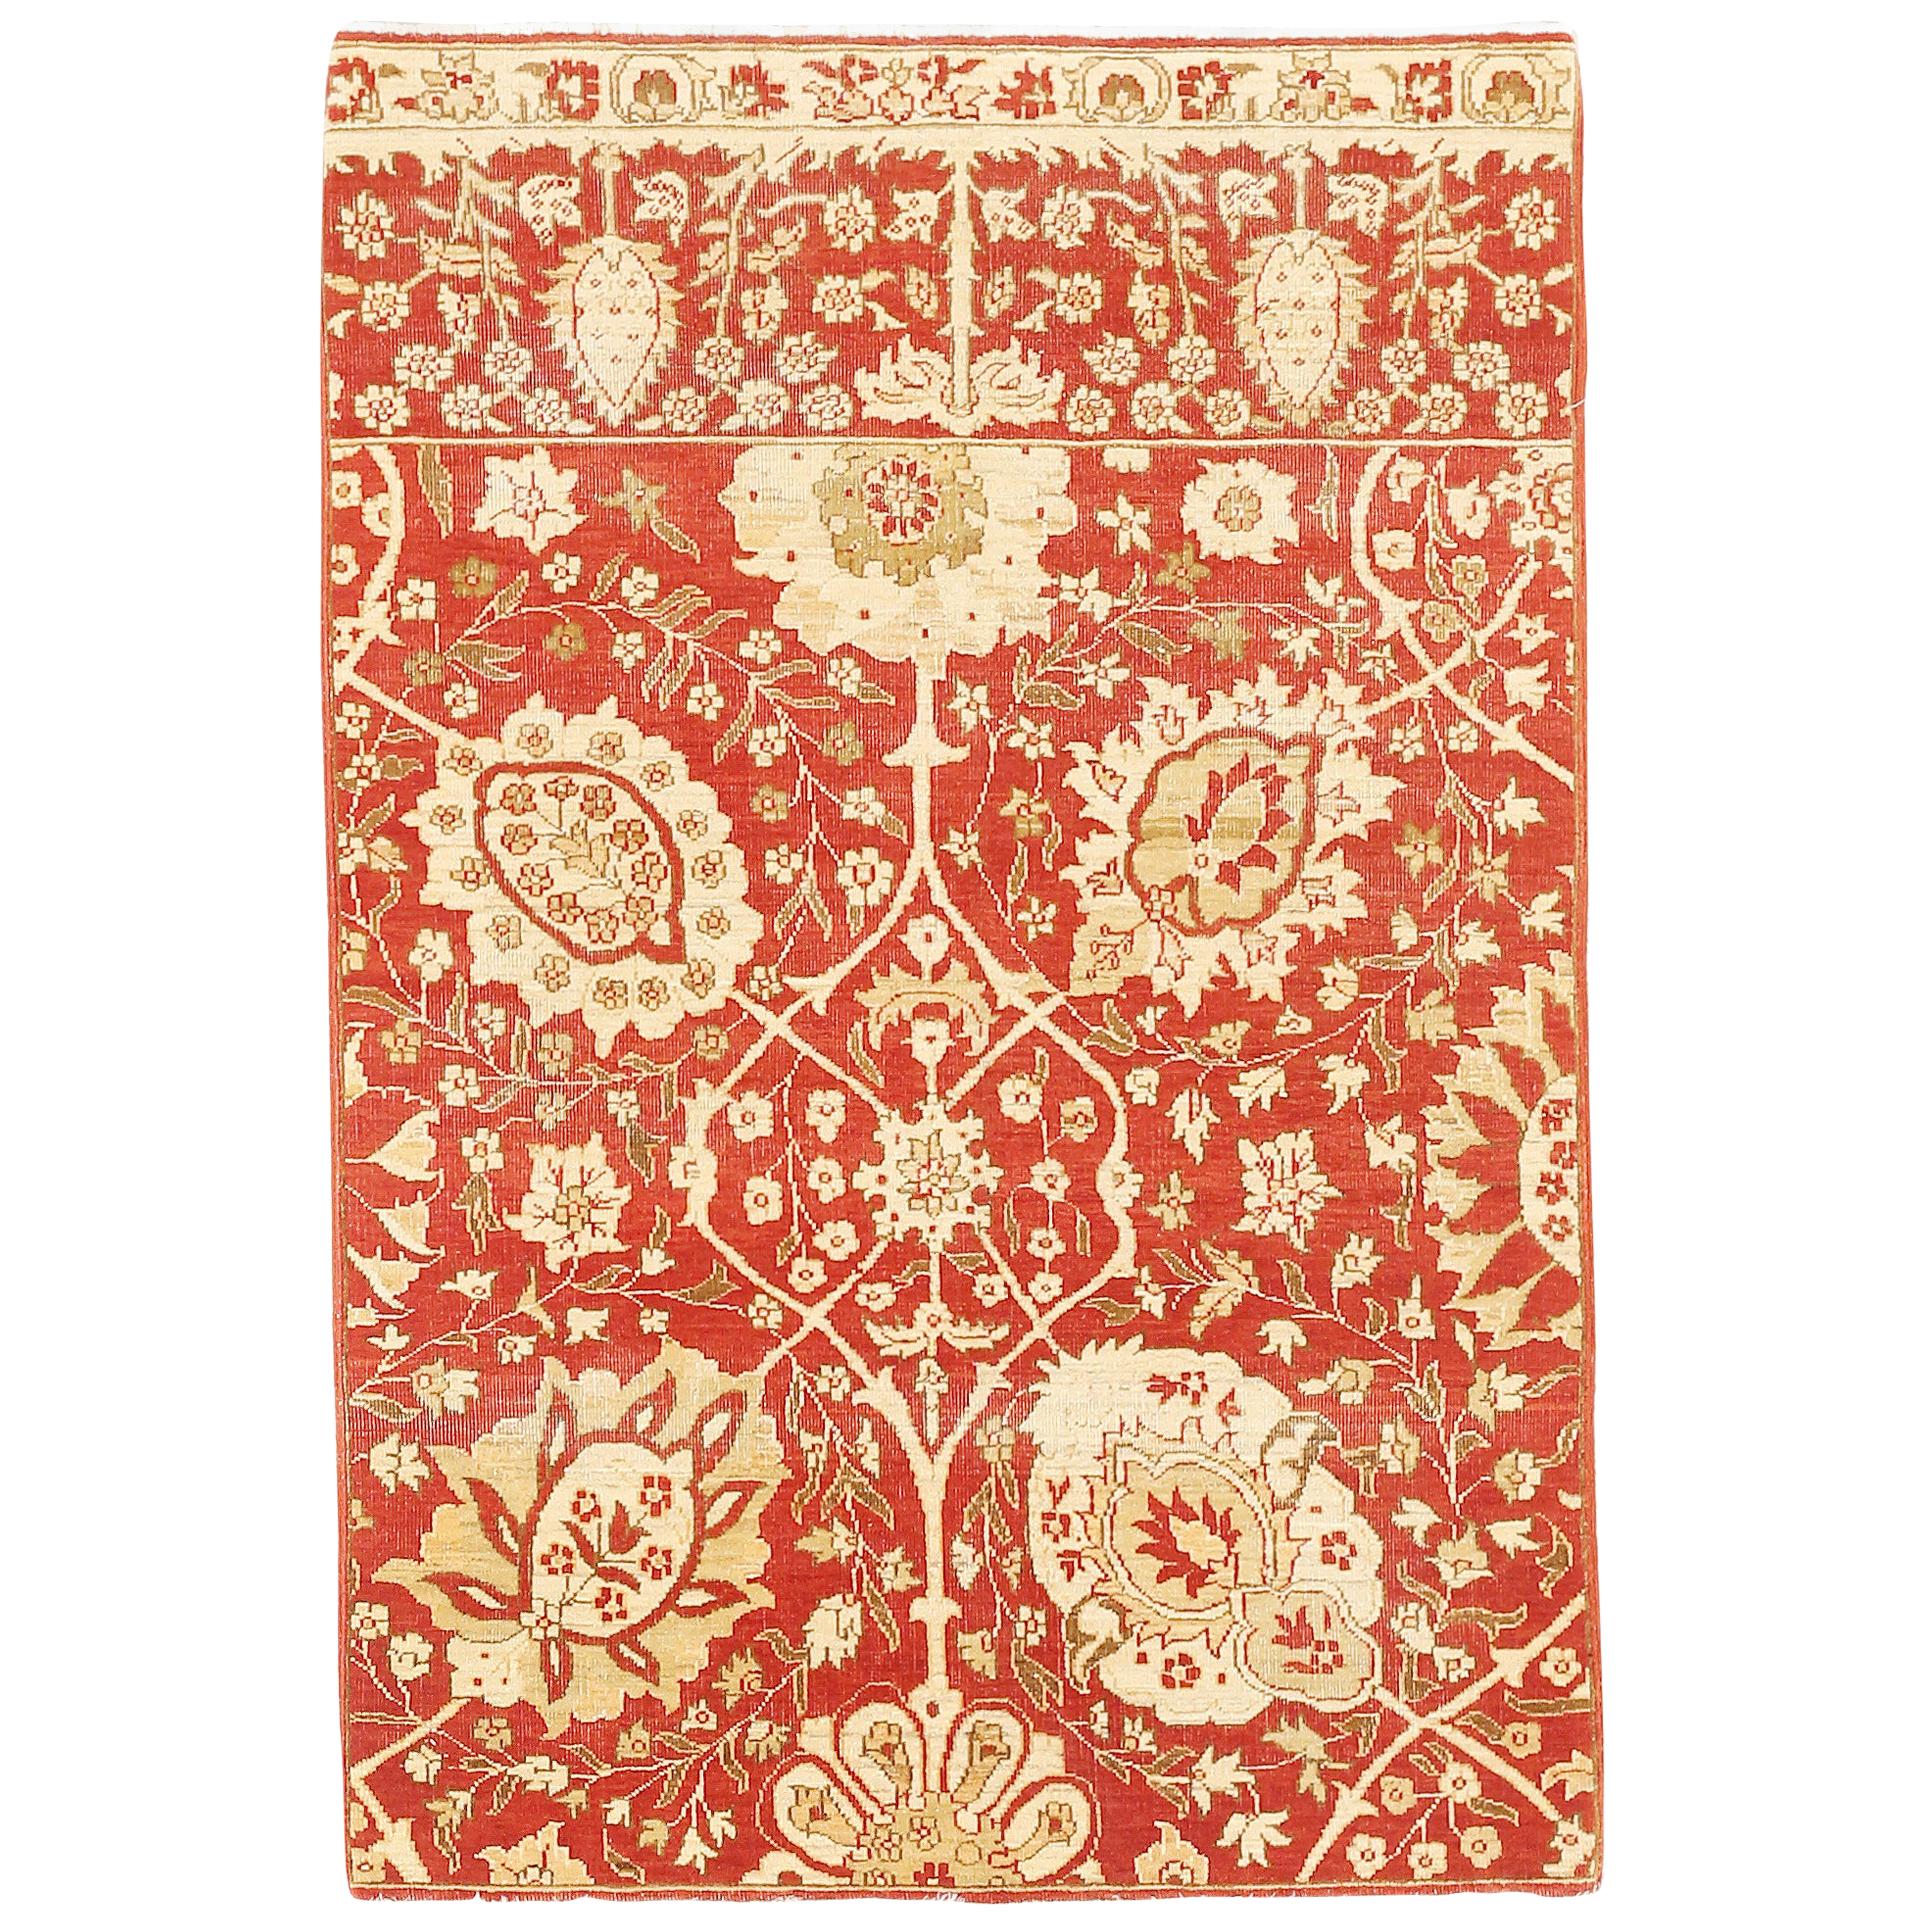 New Tabriz Rug with Beige and Ivory Flower Motifs on Red Field For Sale